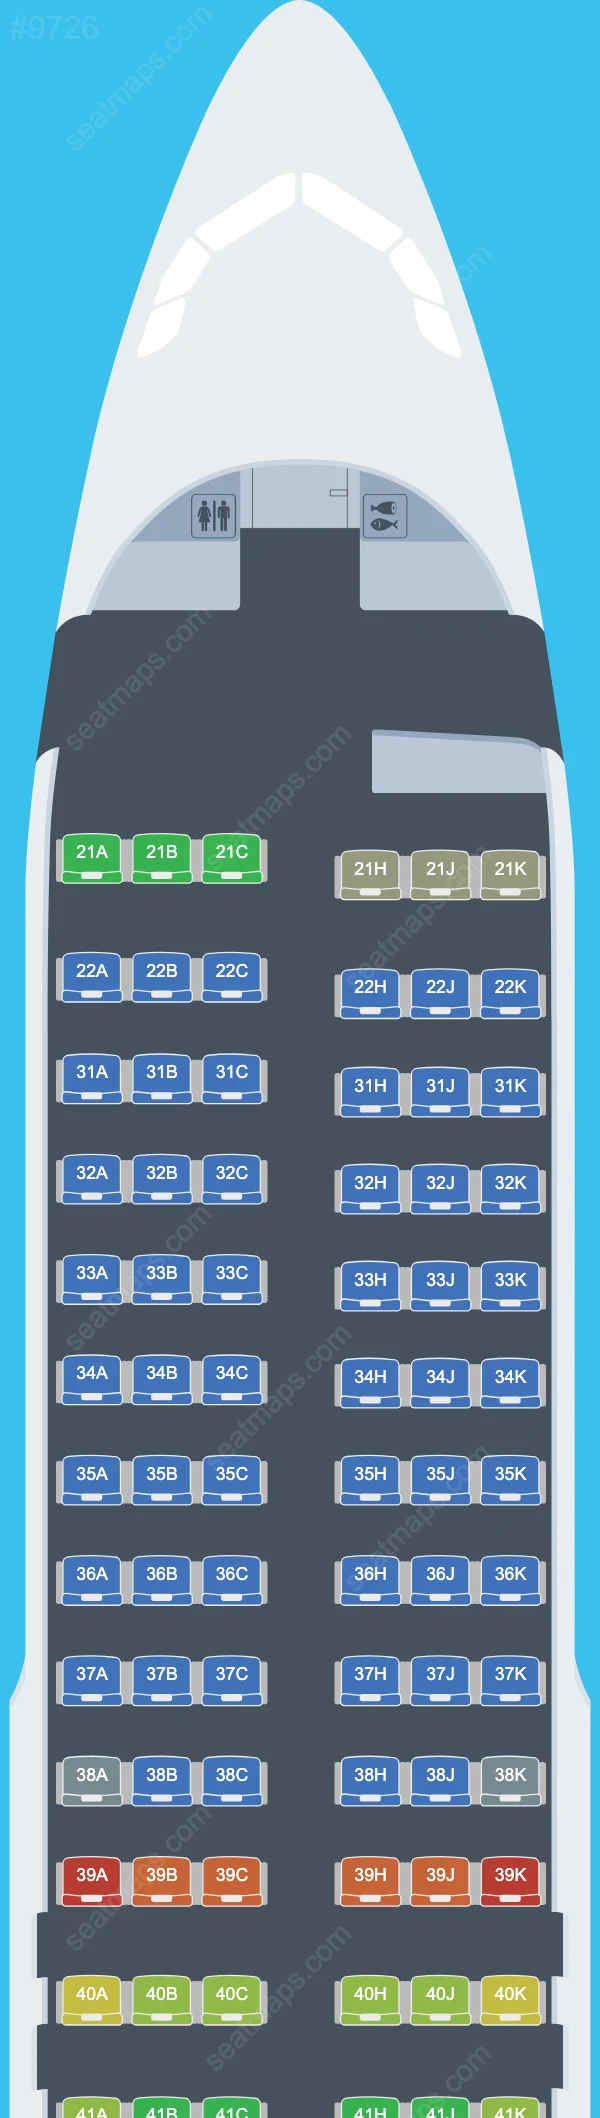 Philippine Airlines (PAL) Airbus A320 Seat Maps A320-200 V.1